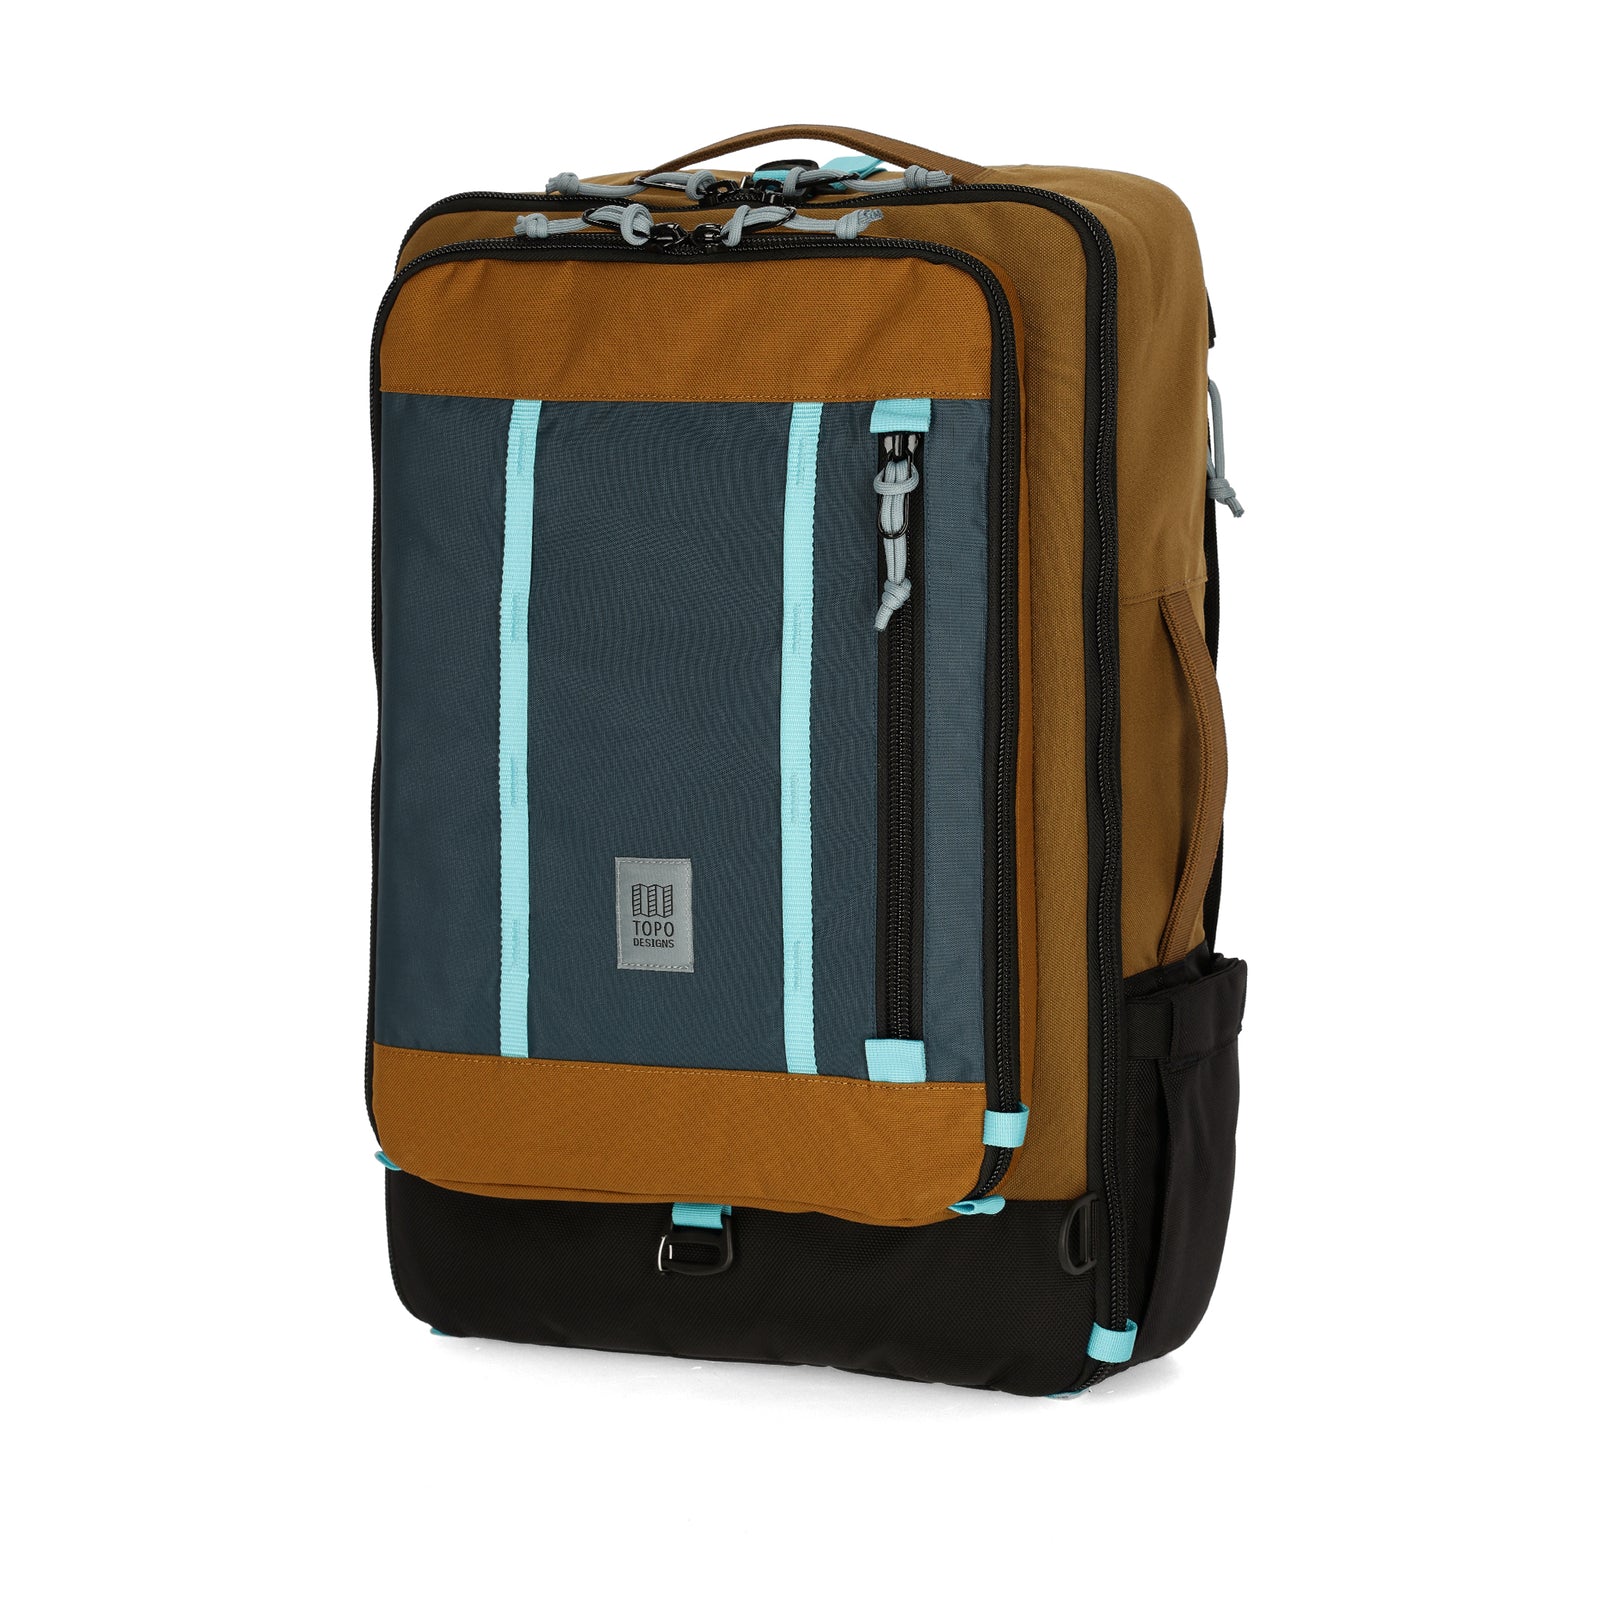 Topo Designs Global Travel Bag 40L Durable Carry On Convertible Laptop Travel Backpack in "Desert Palm / Pond Blue"